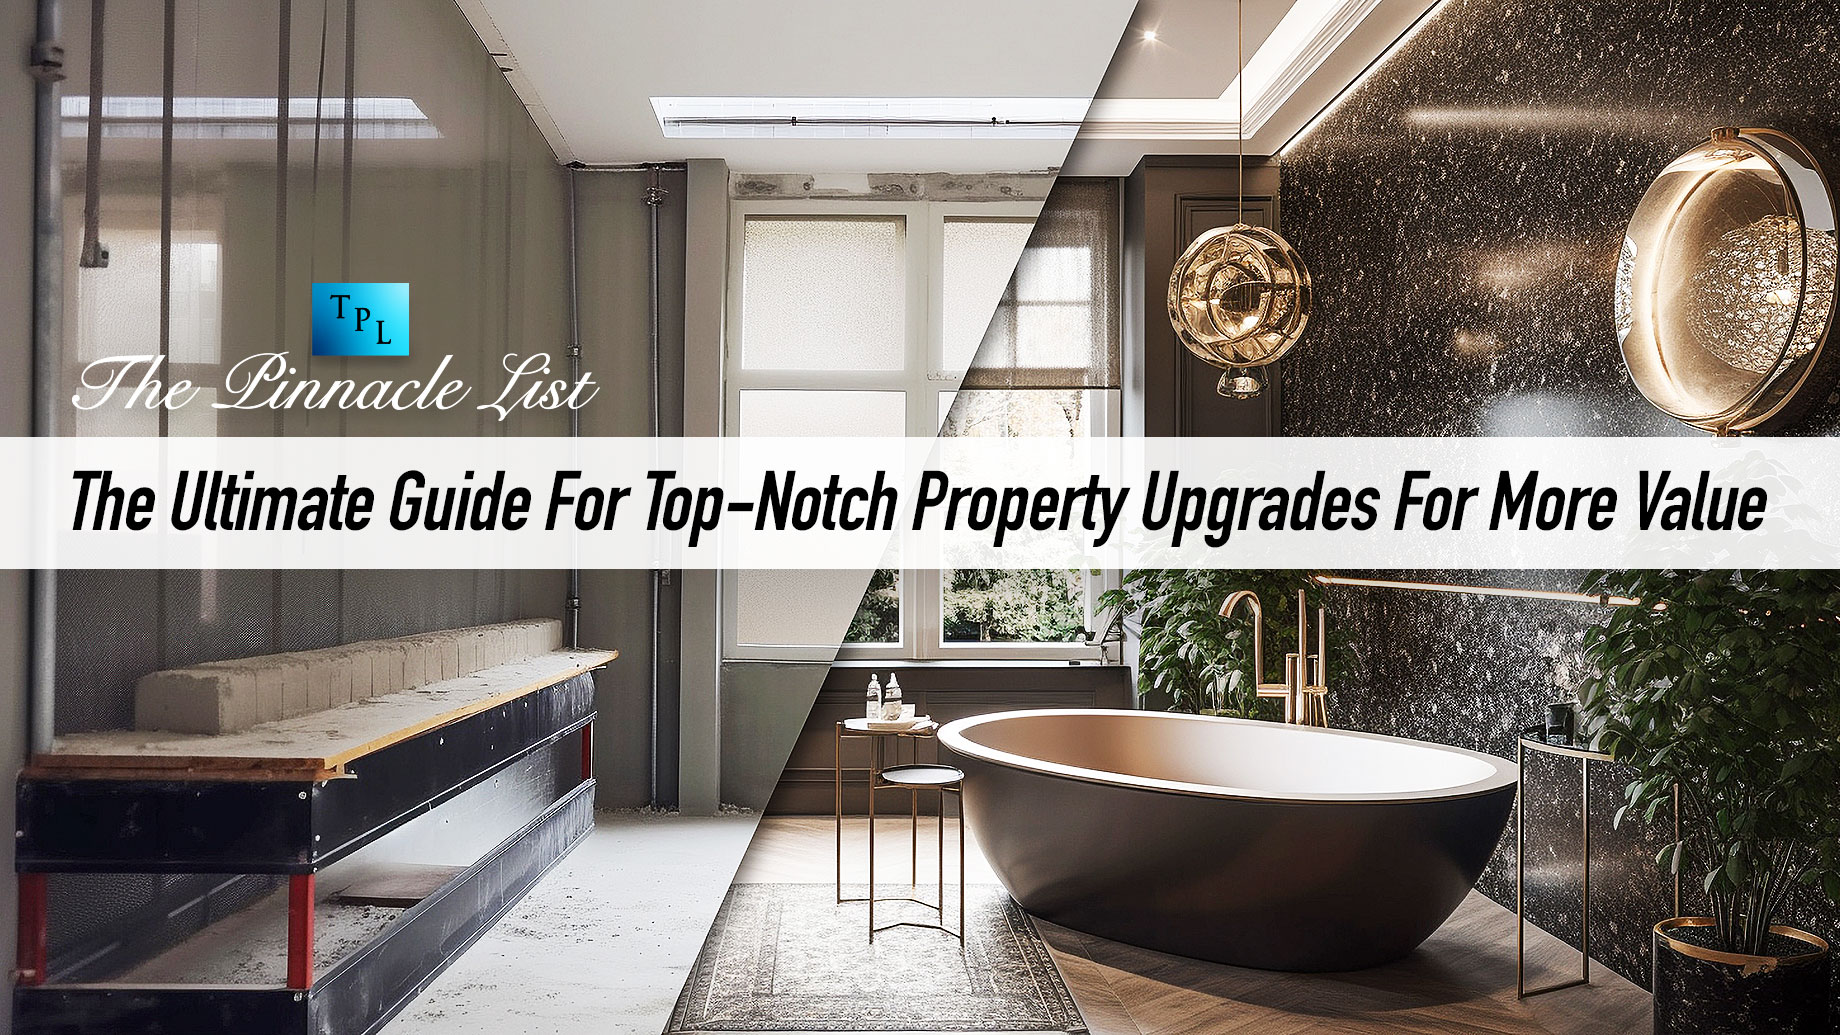 The Ultimate Guide For Top-Notch Property Upgrades For More Value